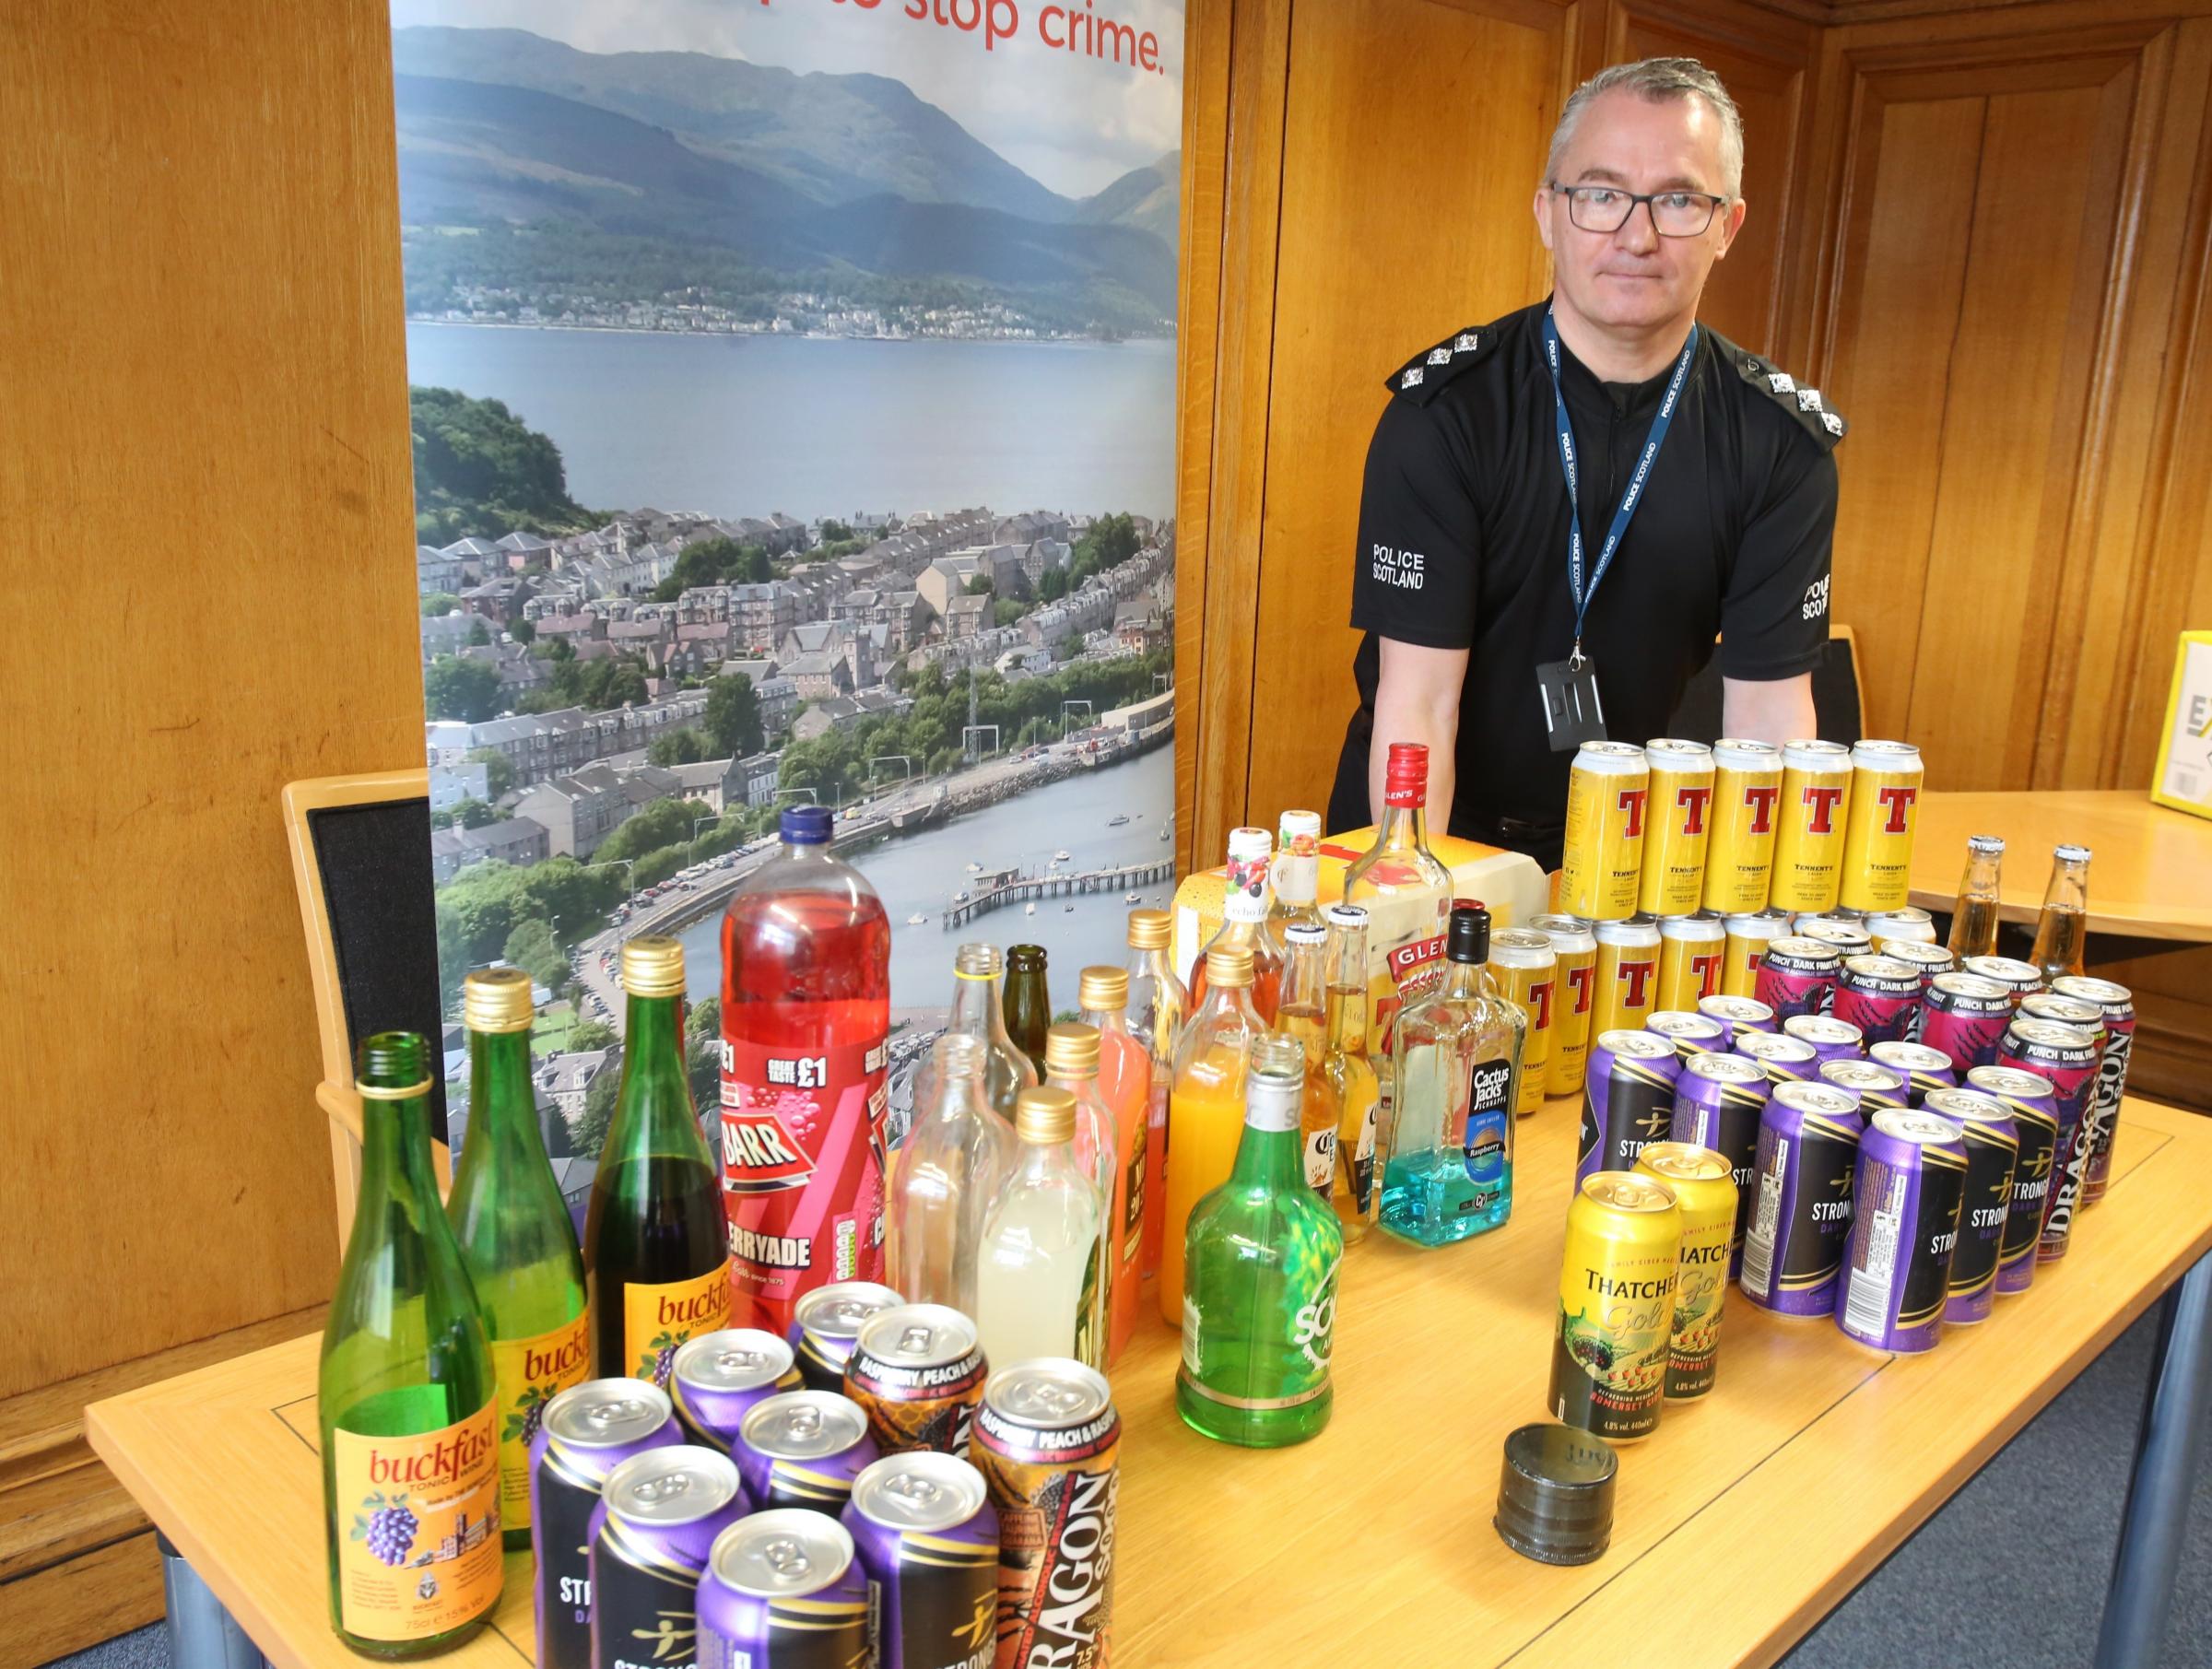 Inverclyde Police youth disorder drugs and alcohol..